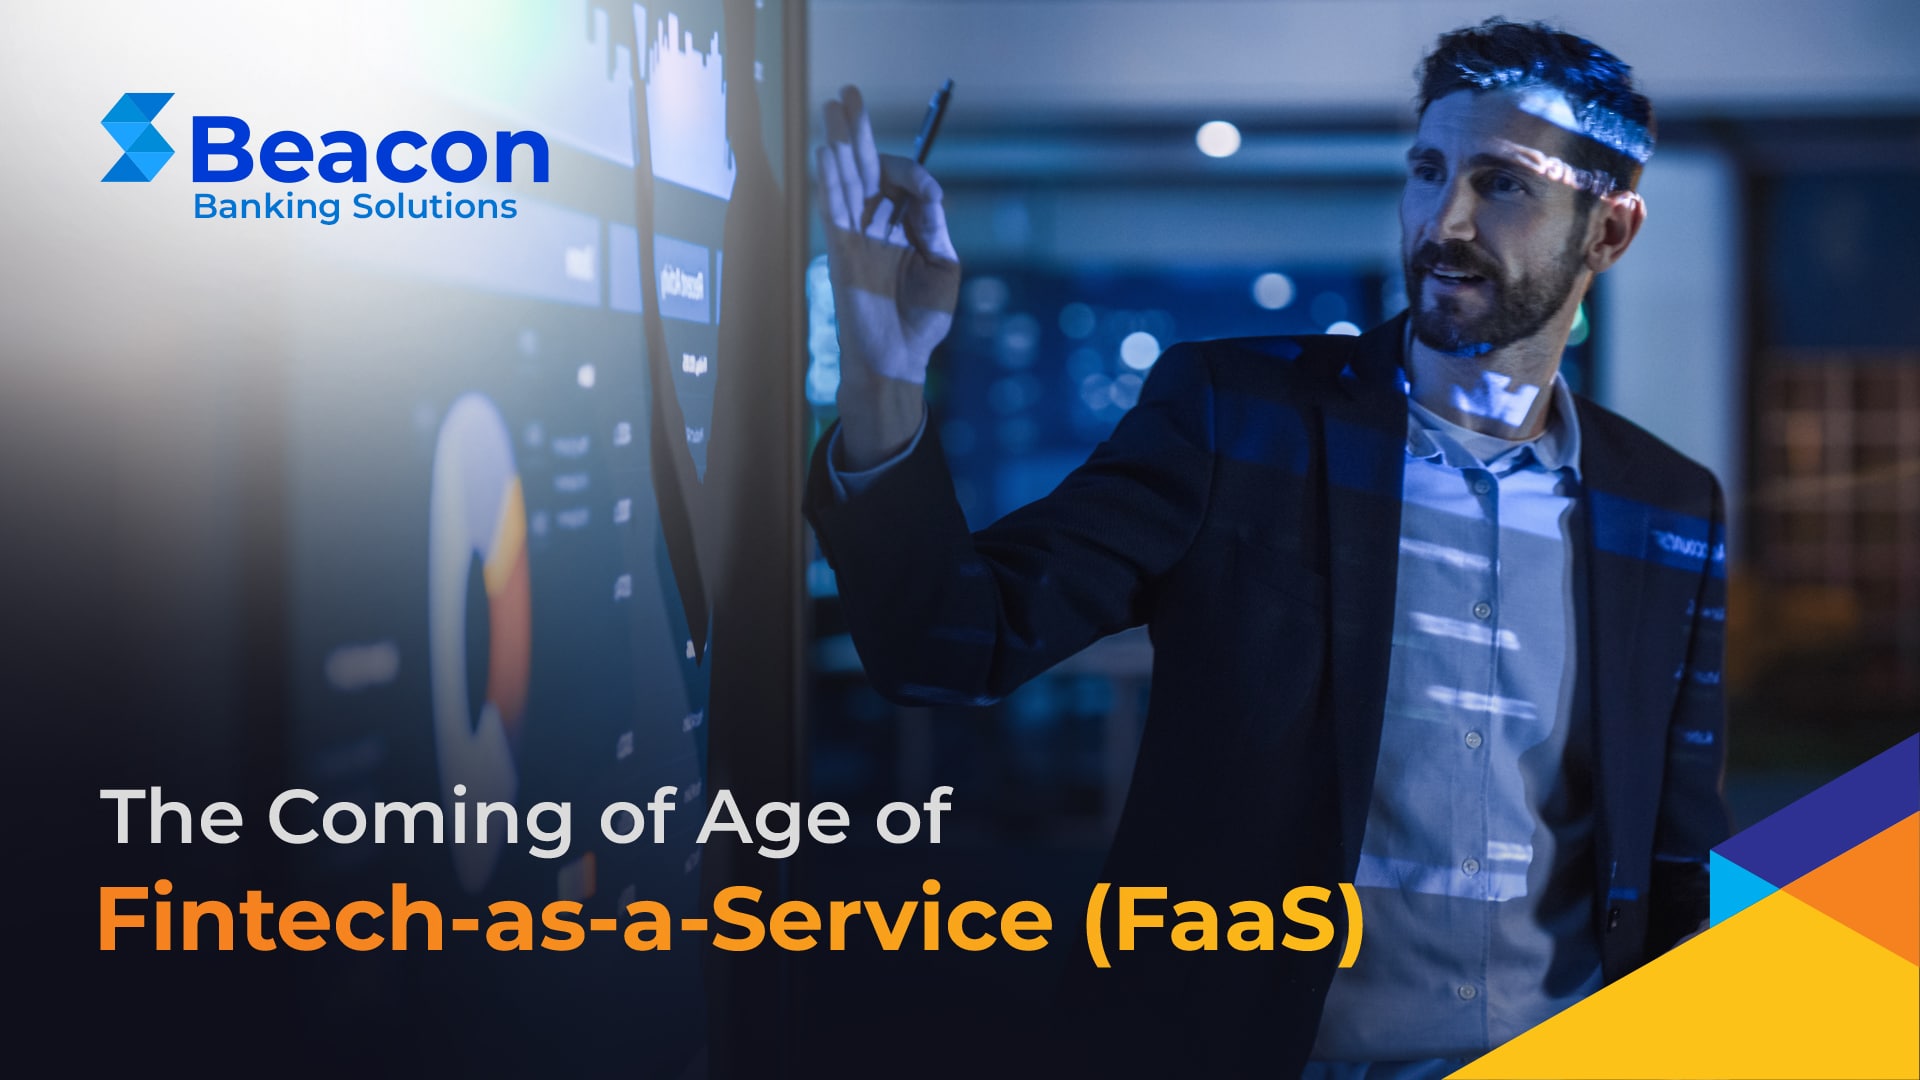 The Coming of Age of Fintech-as-a-Service (FaaS)